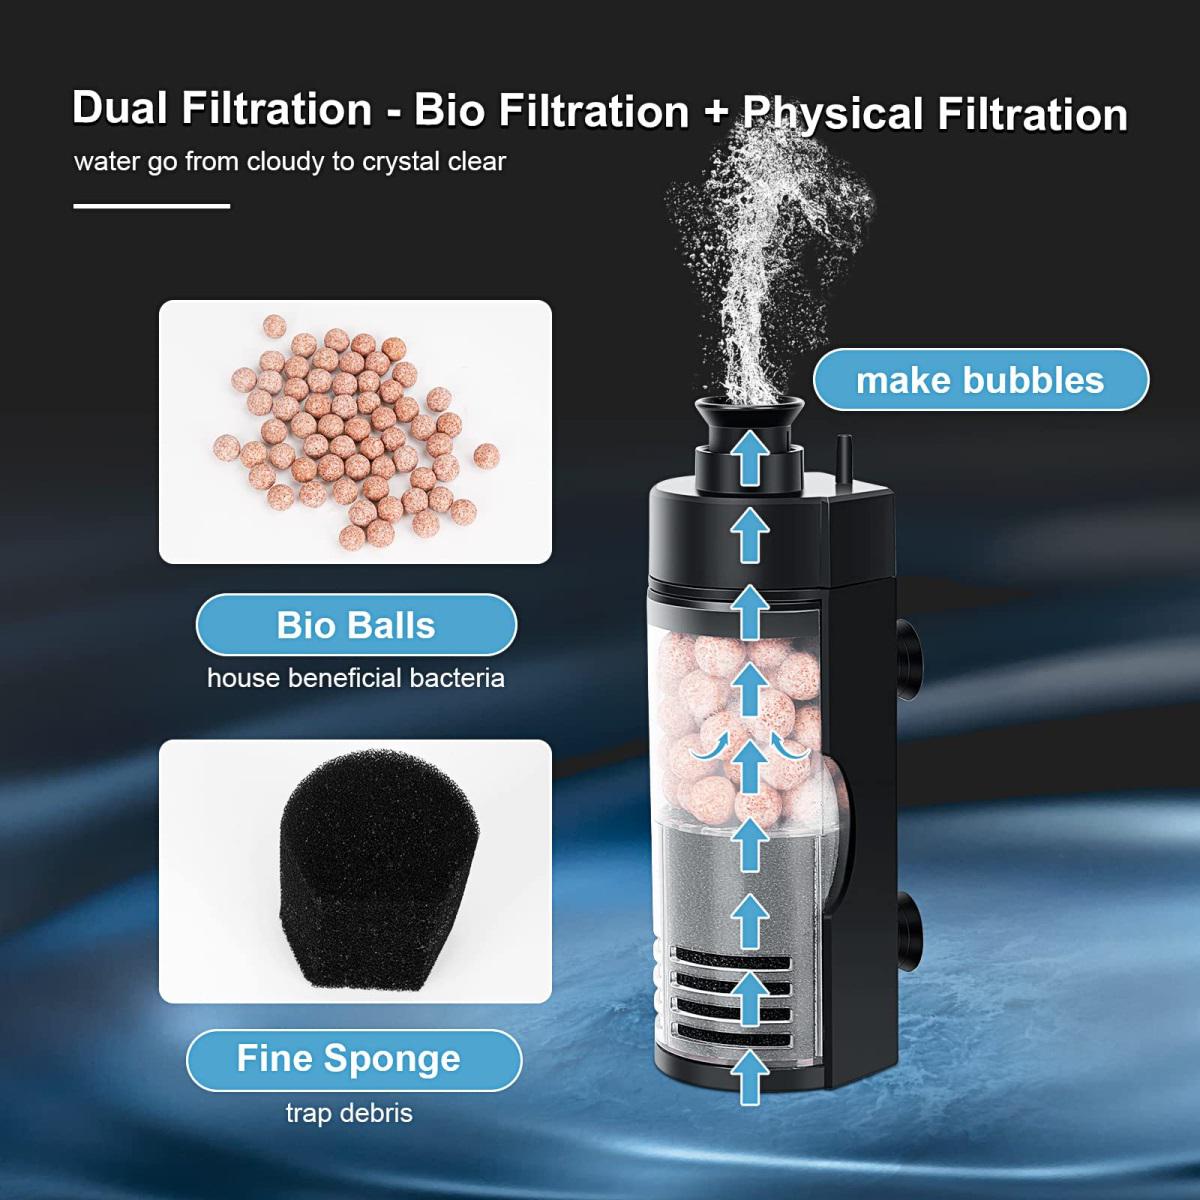 Dual filtration with bio balls